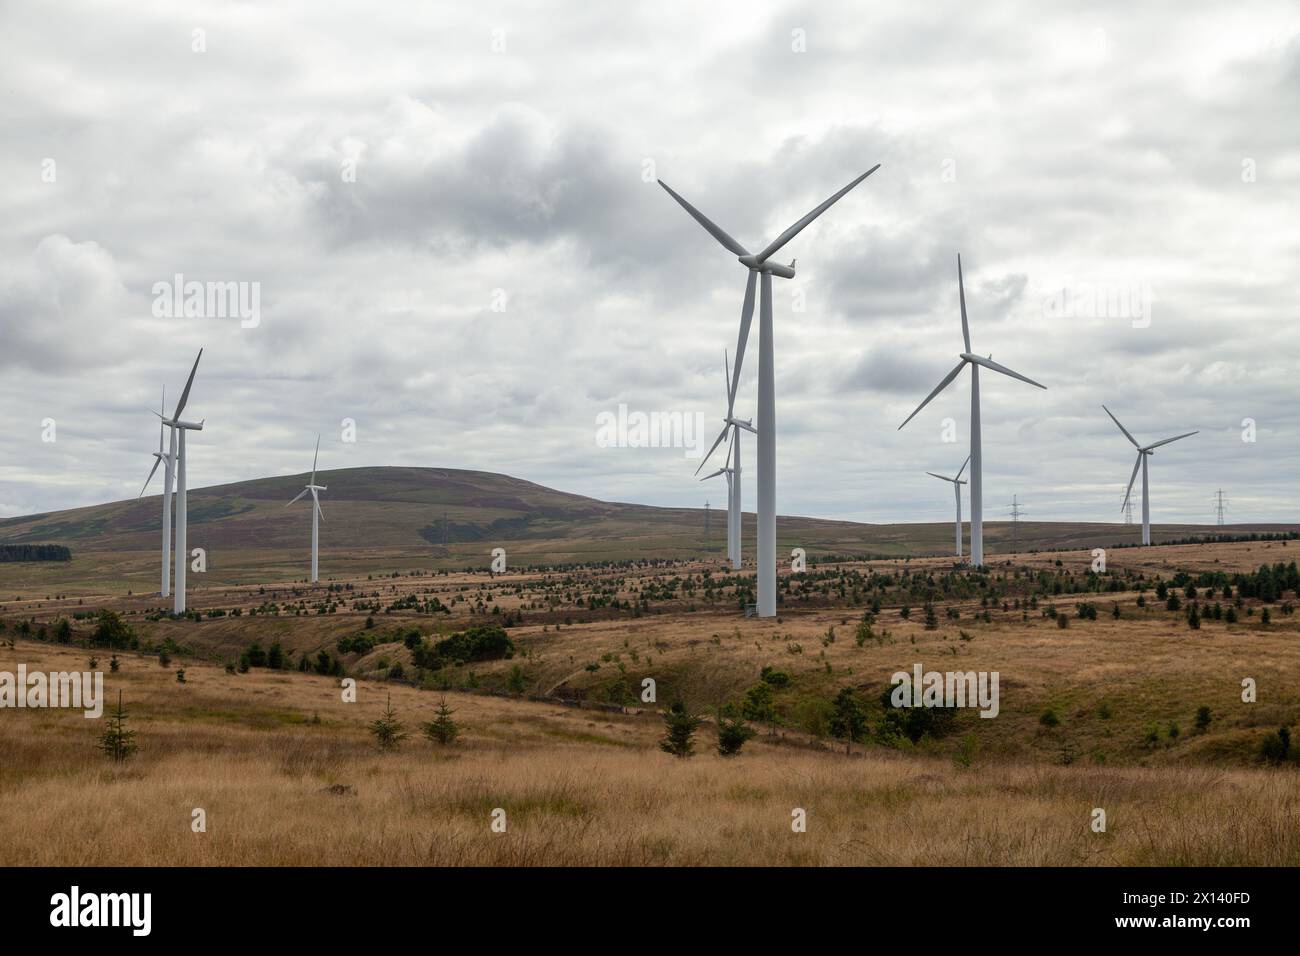 Crystal Rig Wind Farm is an onshore wind farm located on the Lammermuir Hills in the Scottish Borders region of Scotland Stock Photo